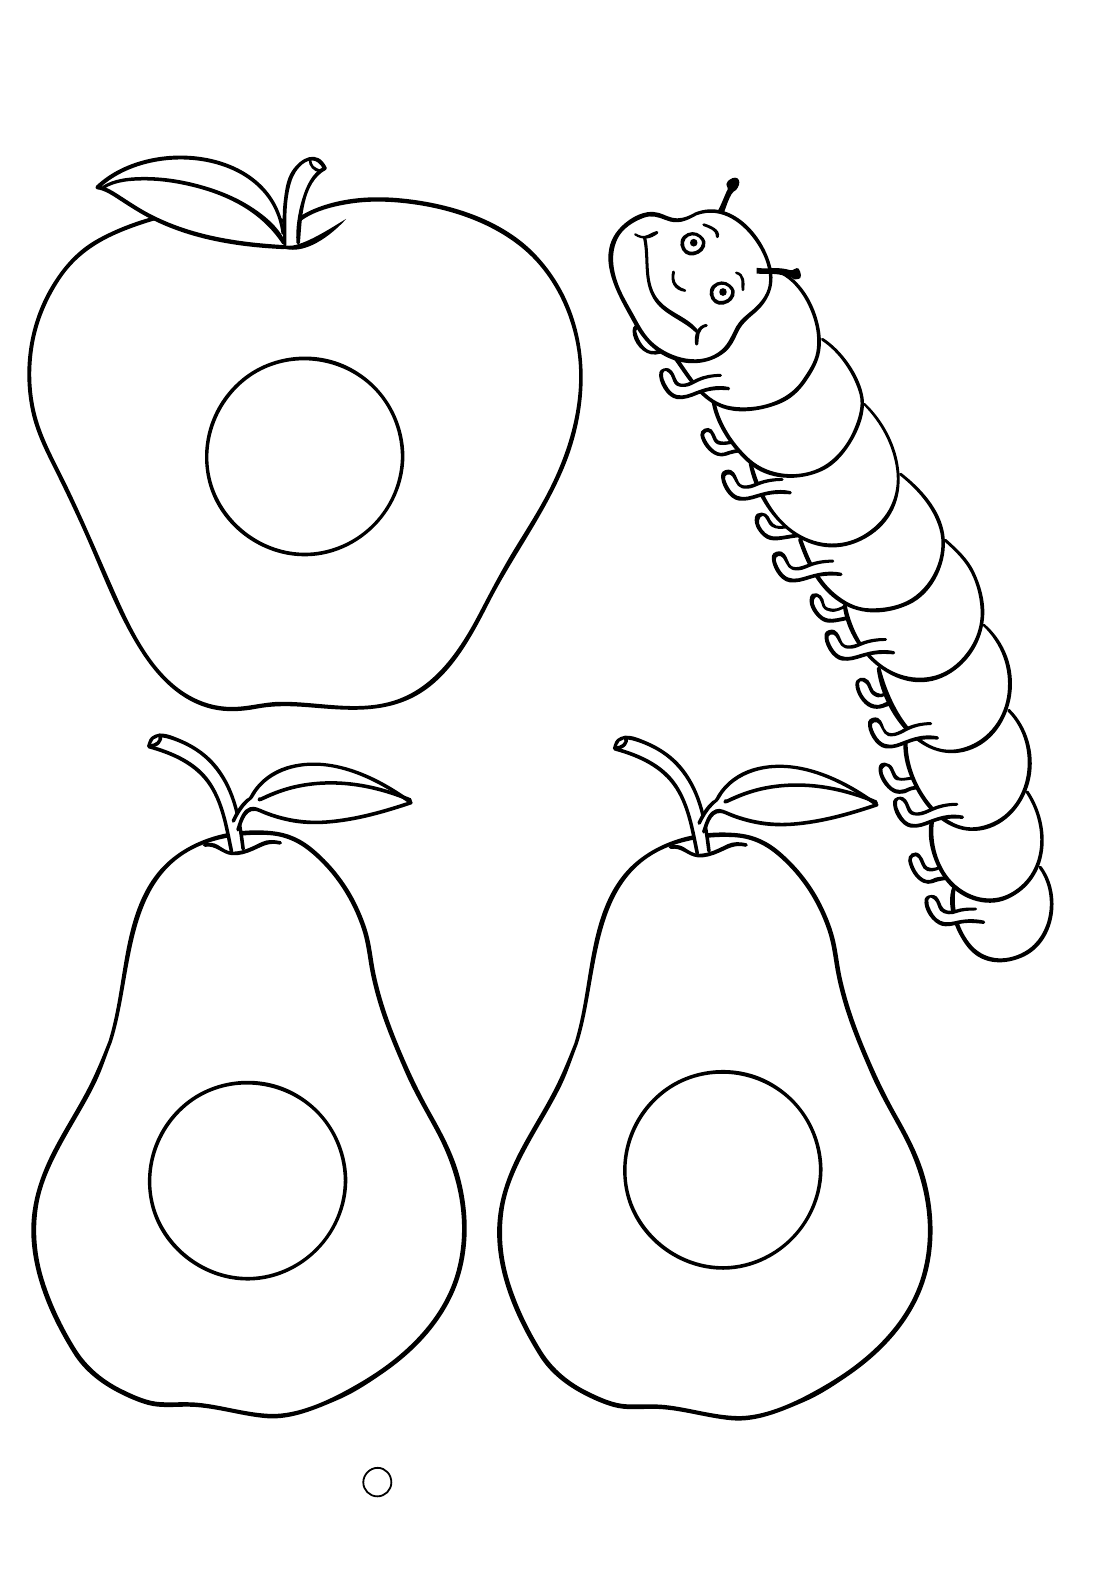 very hungry caterpillar coloring page very hungry caterpillar coloring pages to download and page hungry caterpillar coloring very 